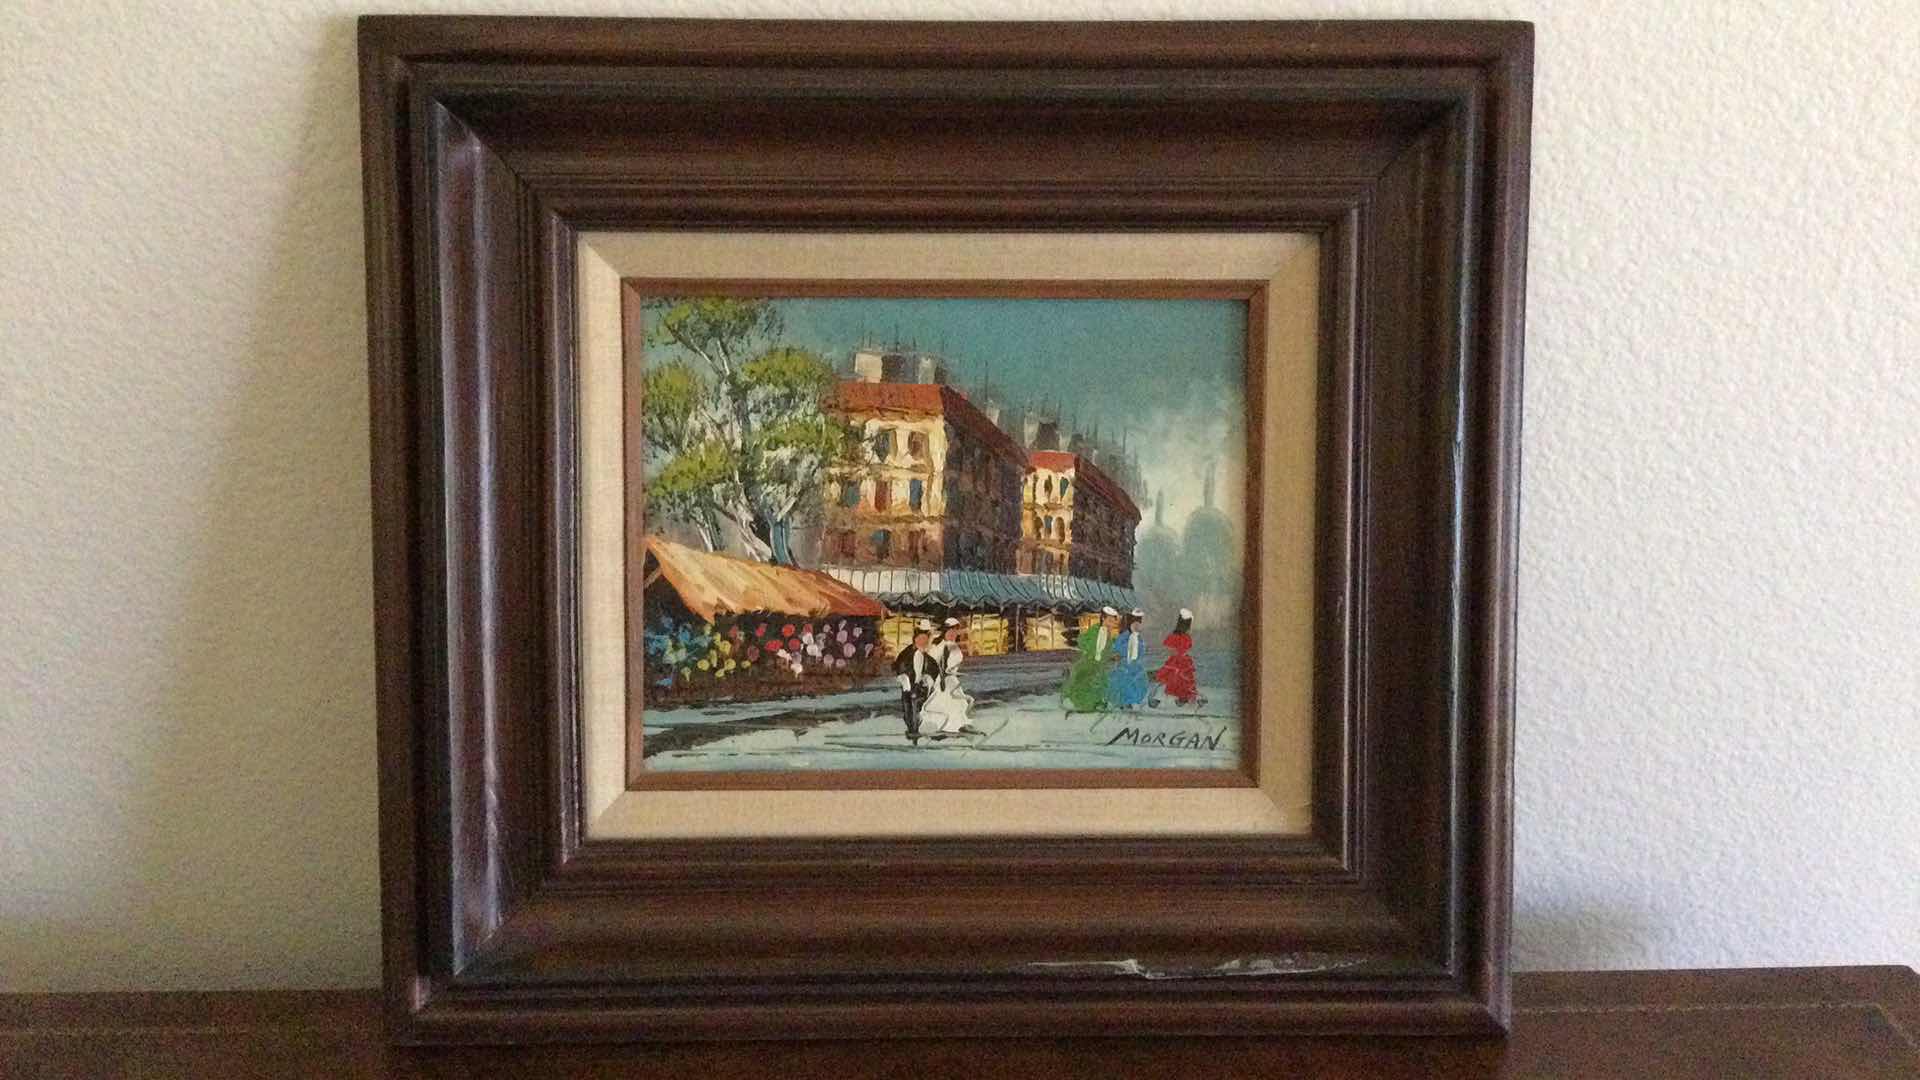 Photo 1 of FRAMED ARTIST SIGNED “MORGAN” PAINTING ON CANVAS 18” X 16”